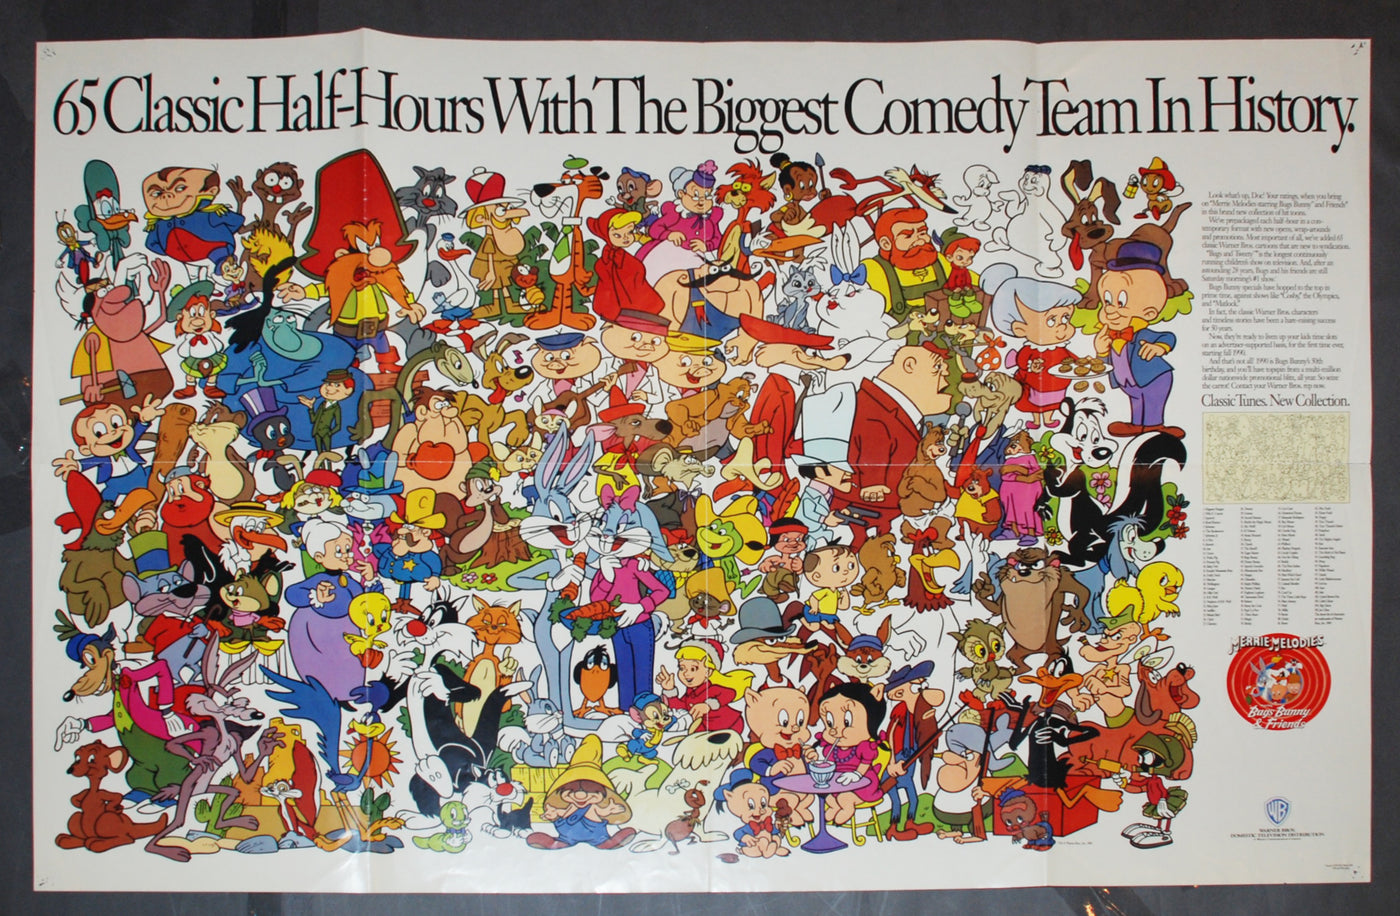 Warner Brothers One Sheet Movie Poster featuring Bugs Bunny and friends